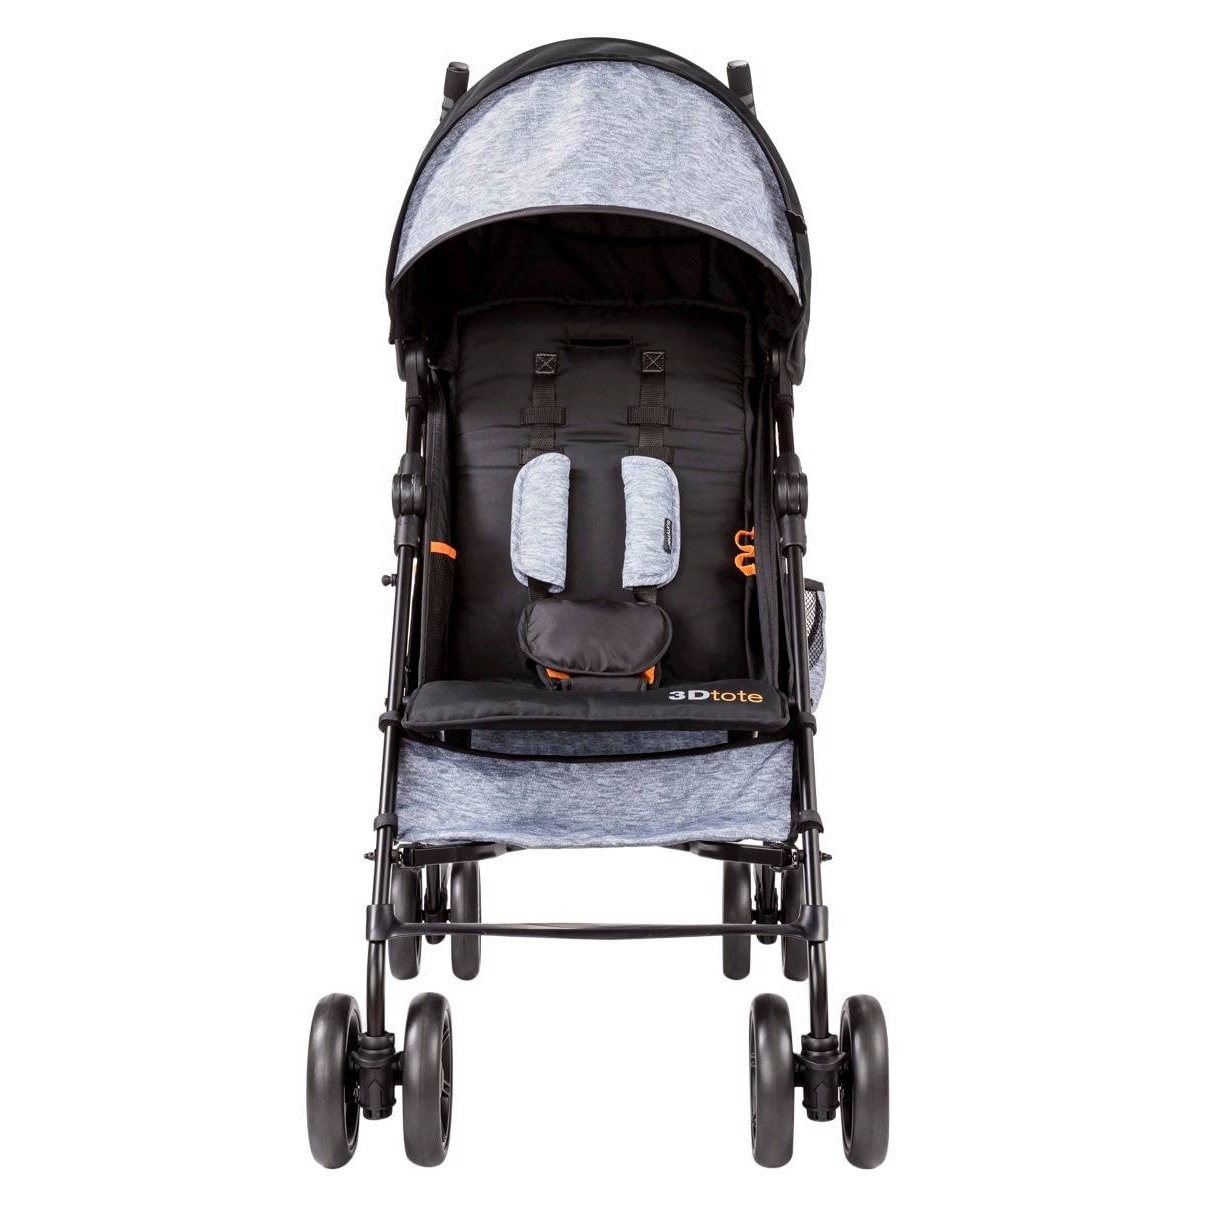 summer 3d tote convenience stroller